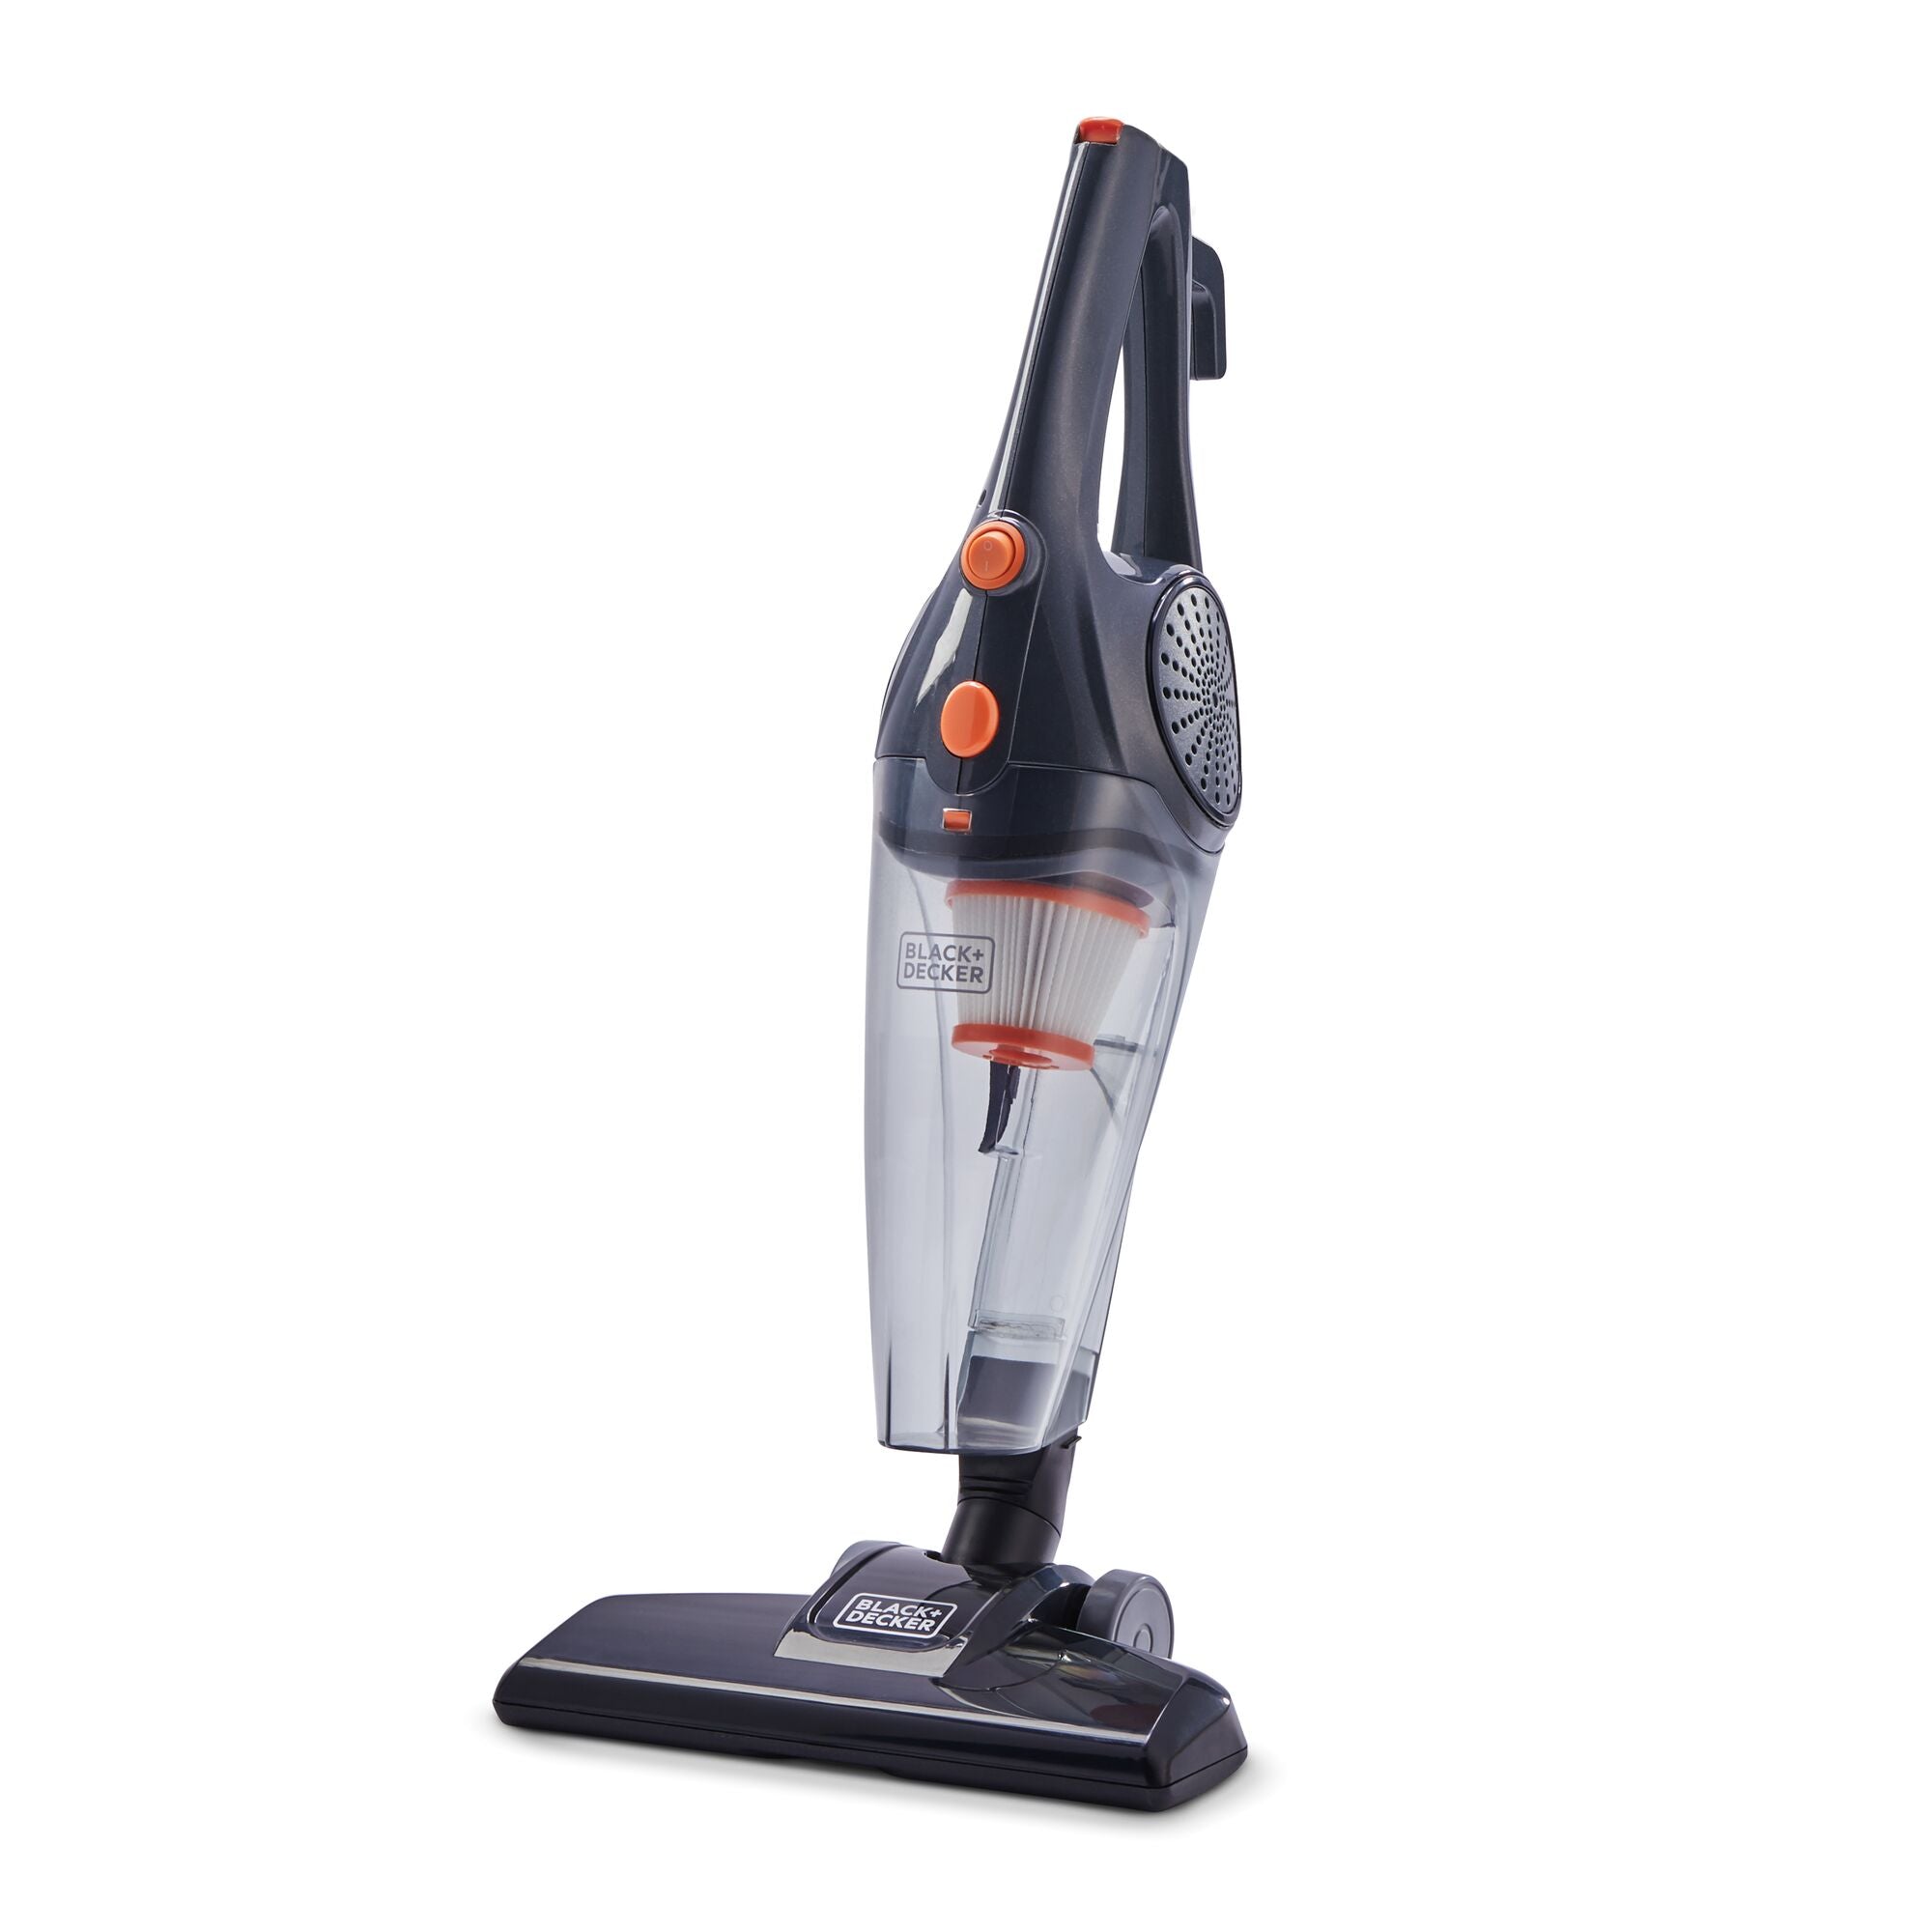 BLACK+DECKER BDXHHV005G 3-In-1 Upright Stick And Handheld Vacuum Cleaner view 2